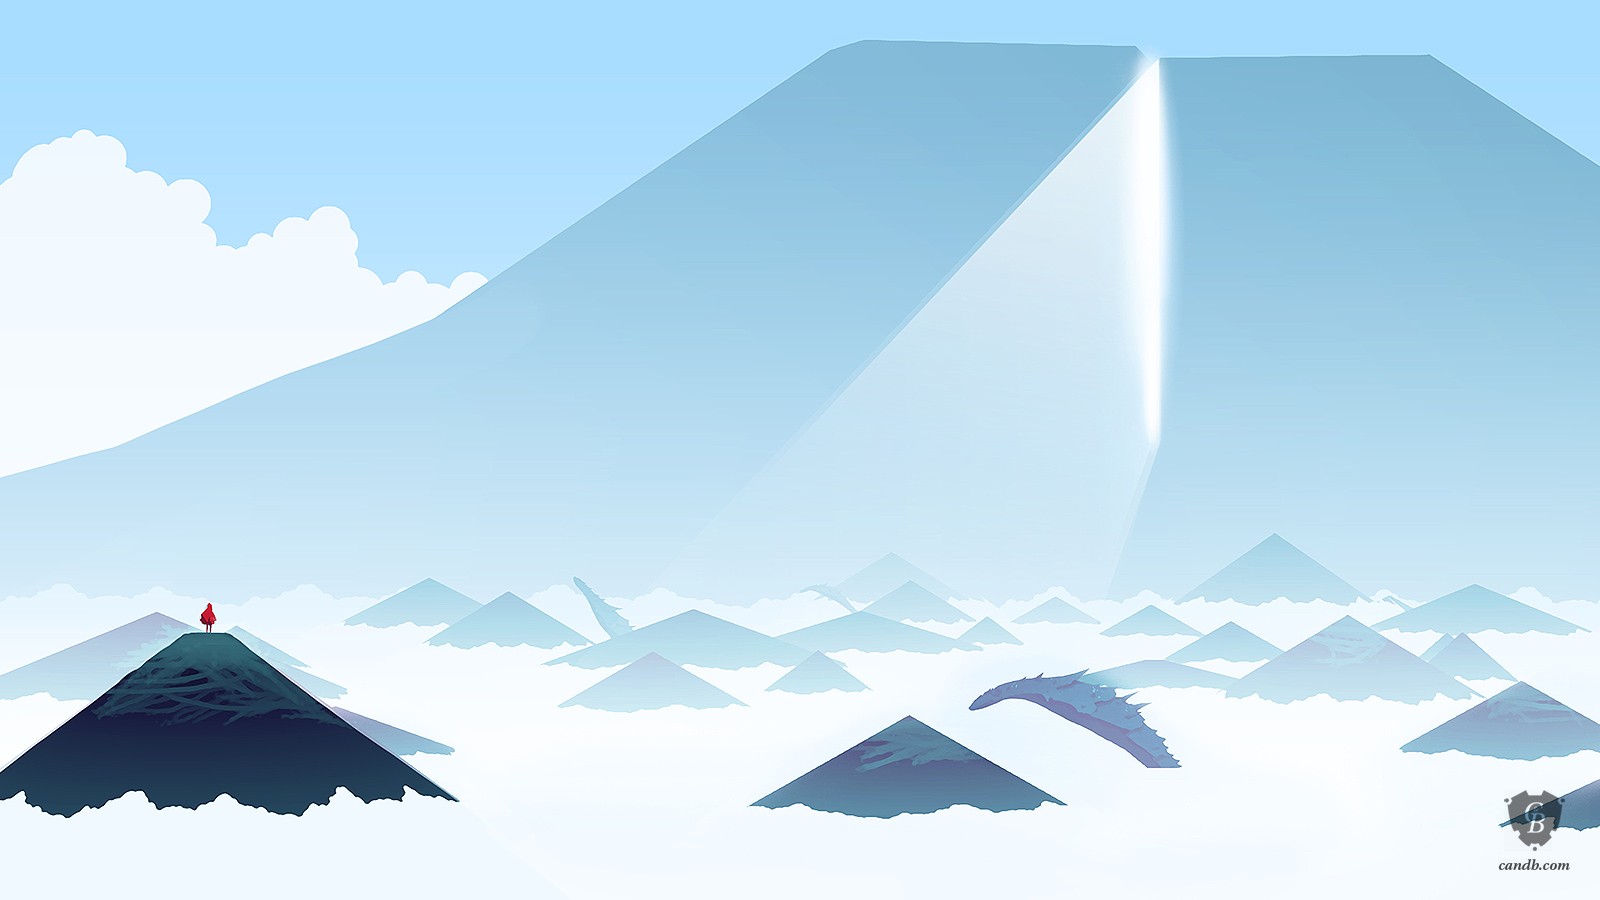 mountain_in_the_sky-thatgamecompany-journey_art1600_1600x900_marked.jpg